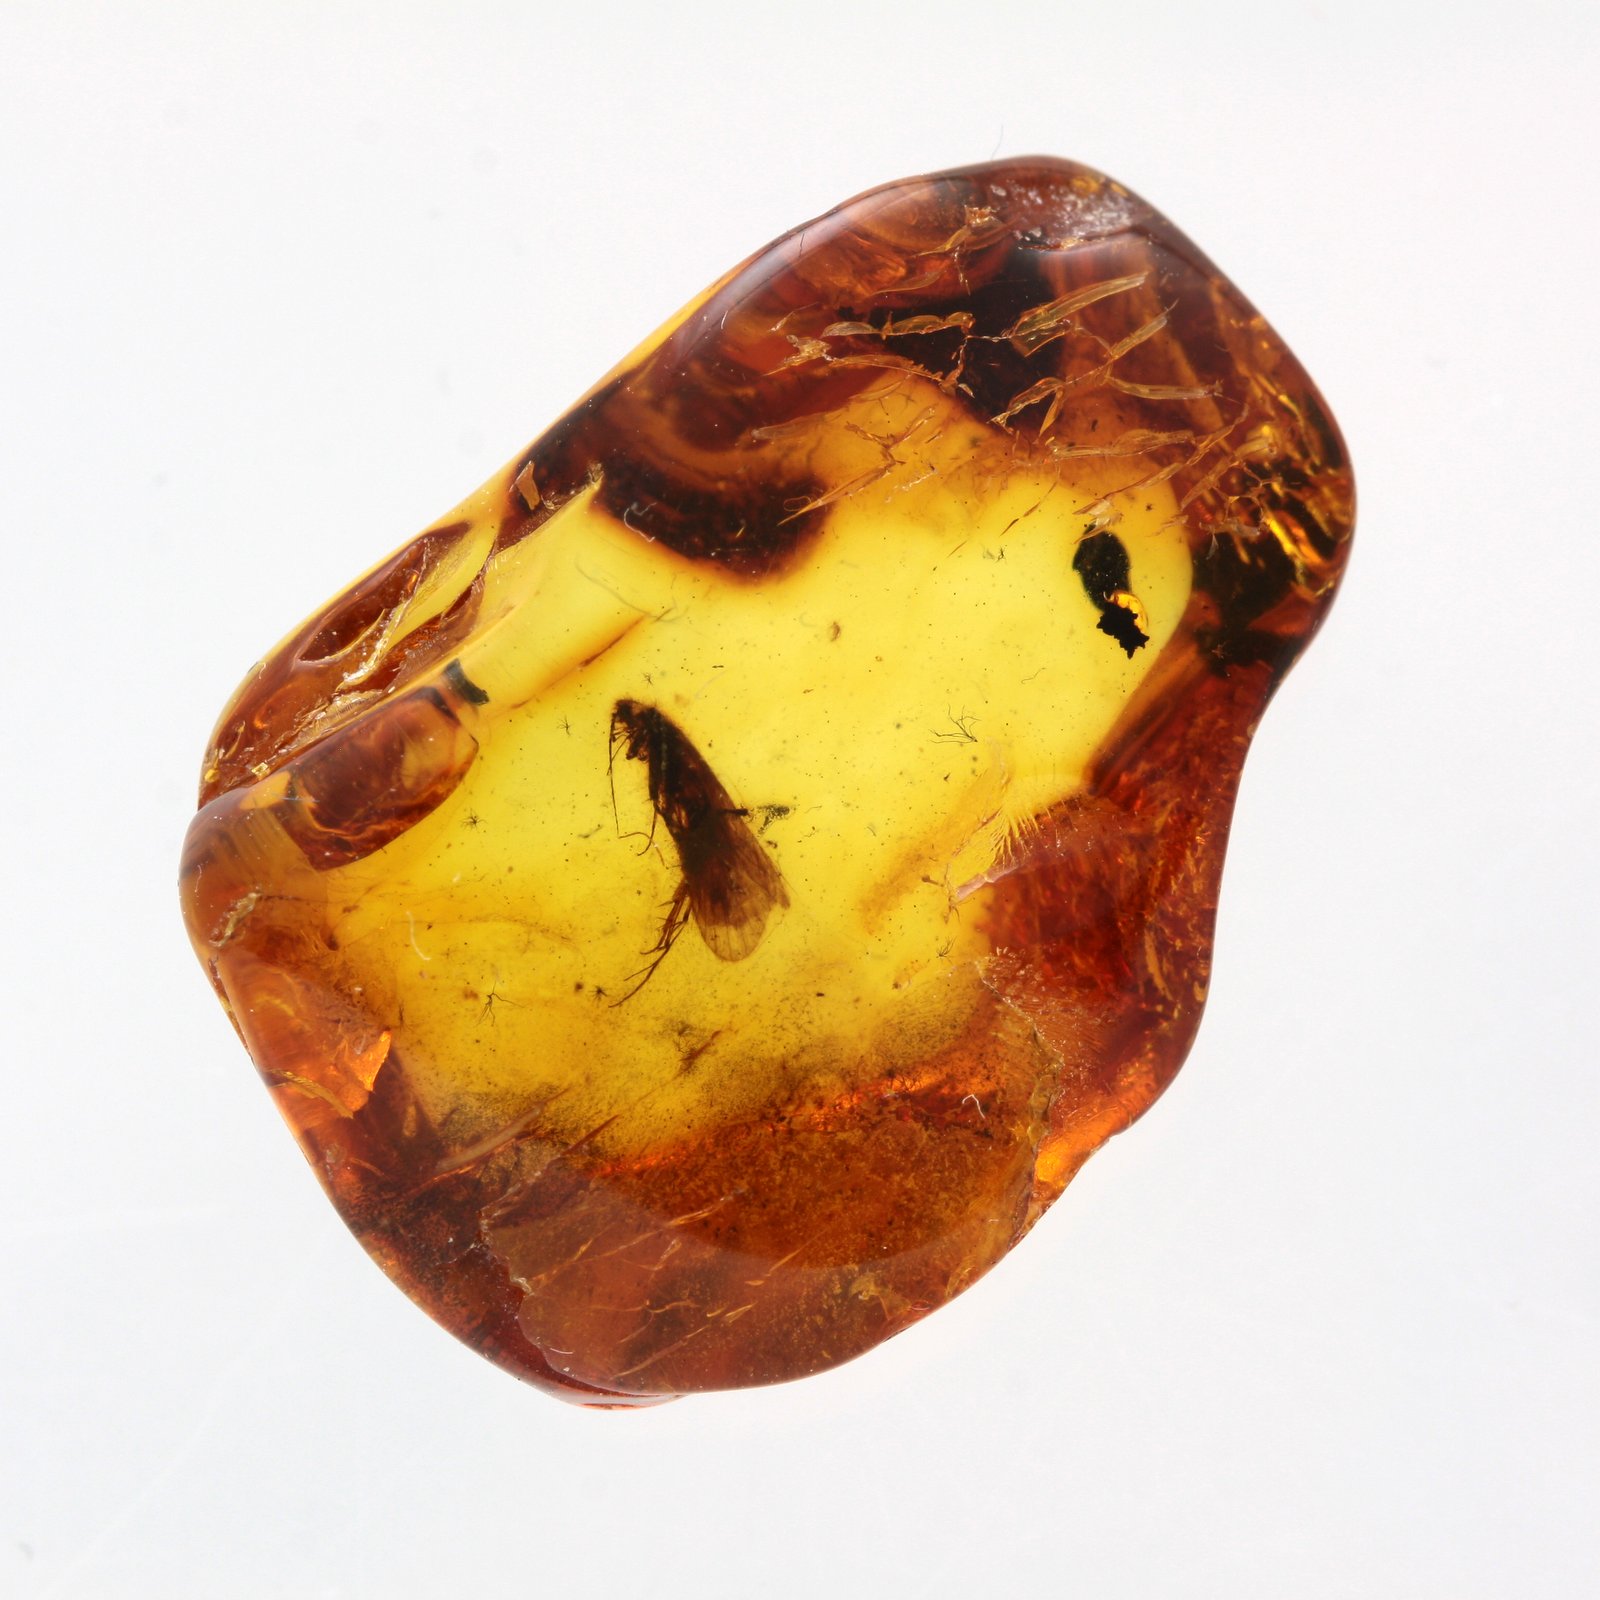 Baltic amber Amber gift | Insect fossil in amber Amber inclusion Inclusion fossil